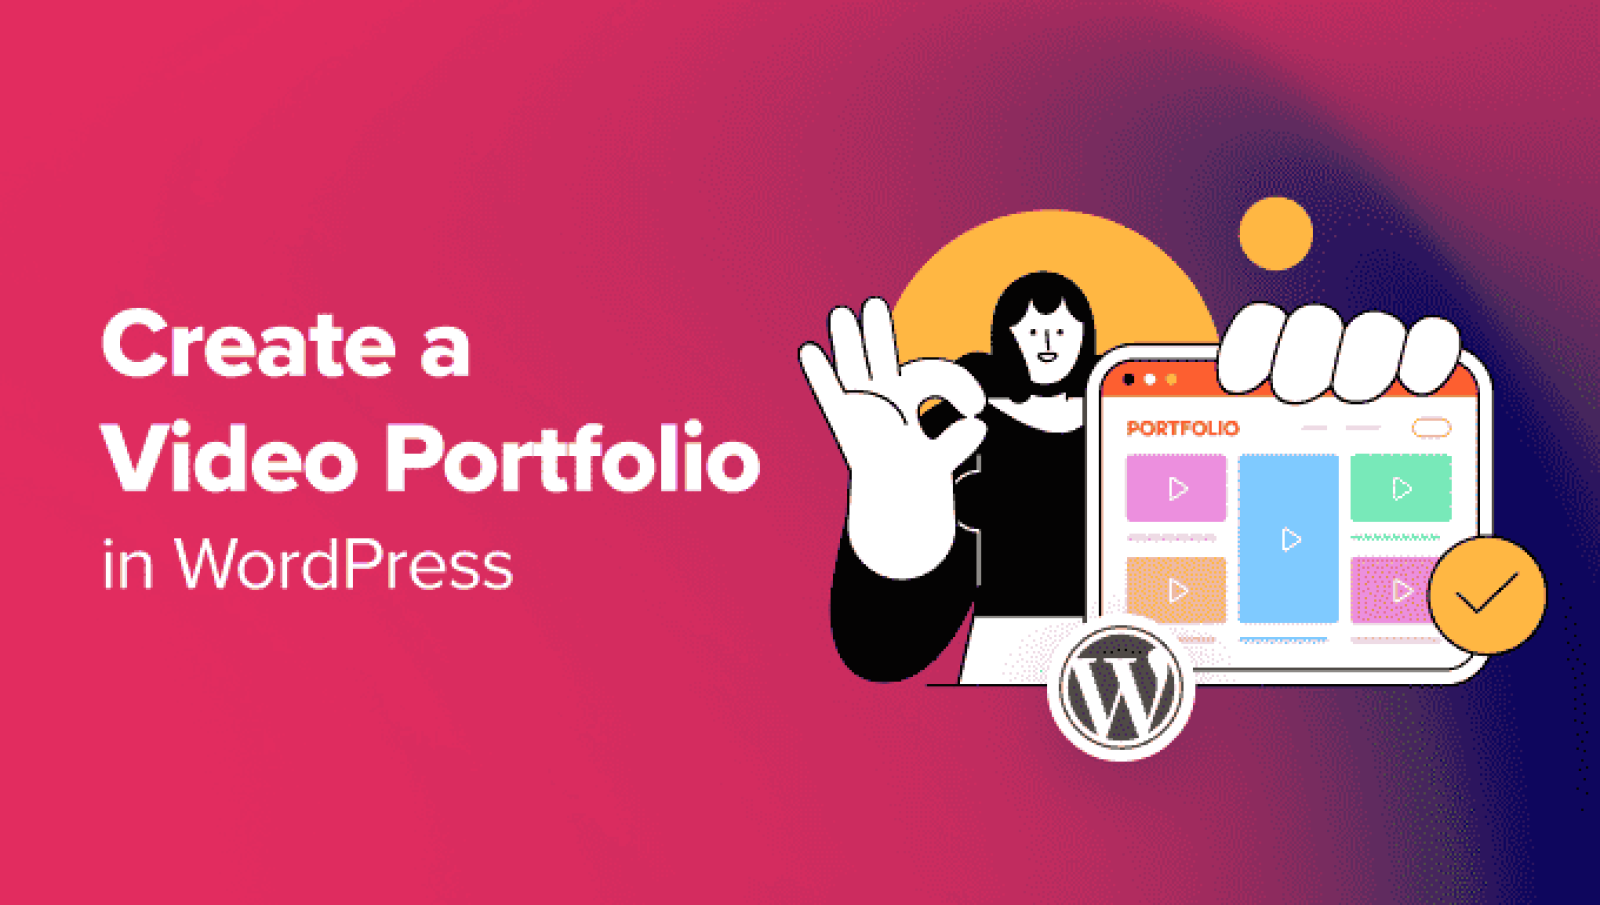 Tips on how to Create a Video Portfolio in WordPress (Step by Step)